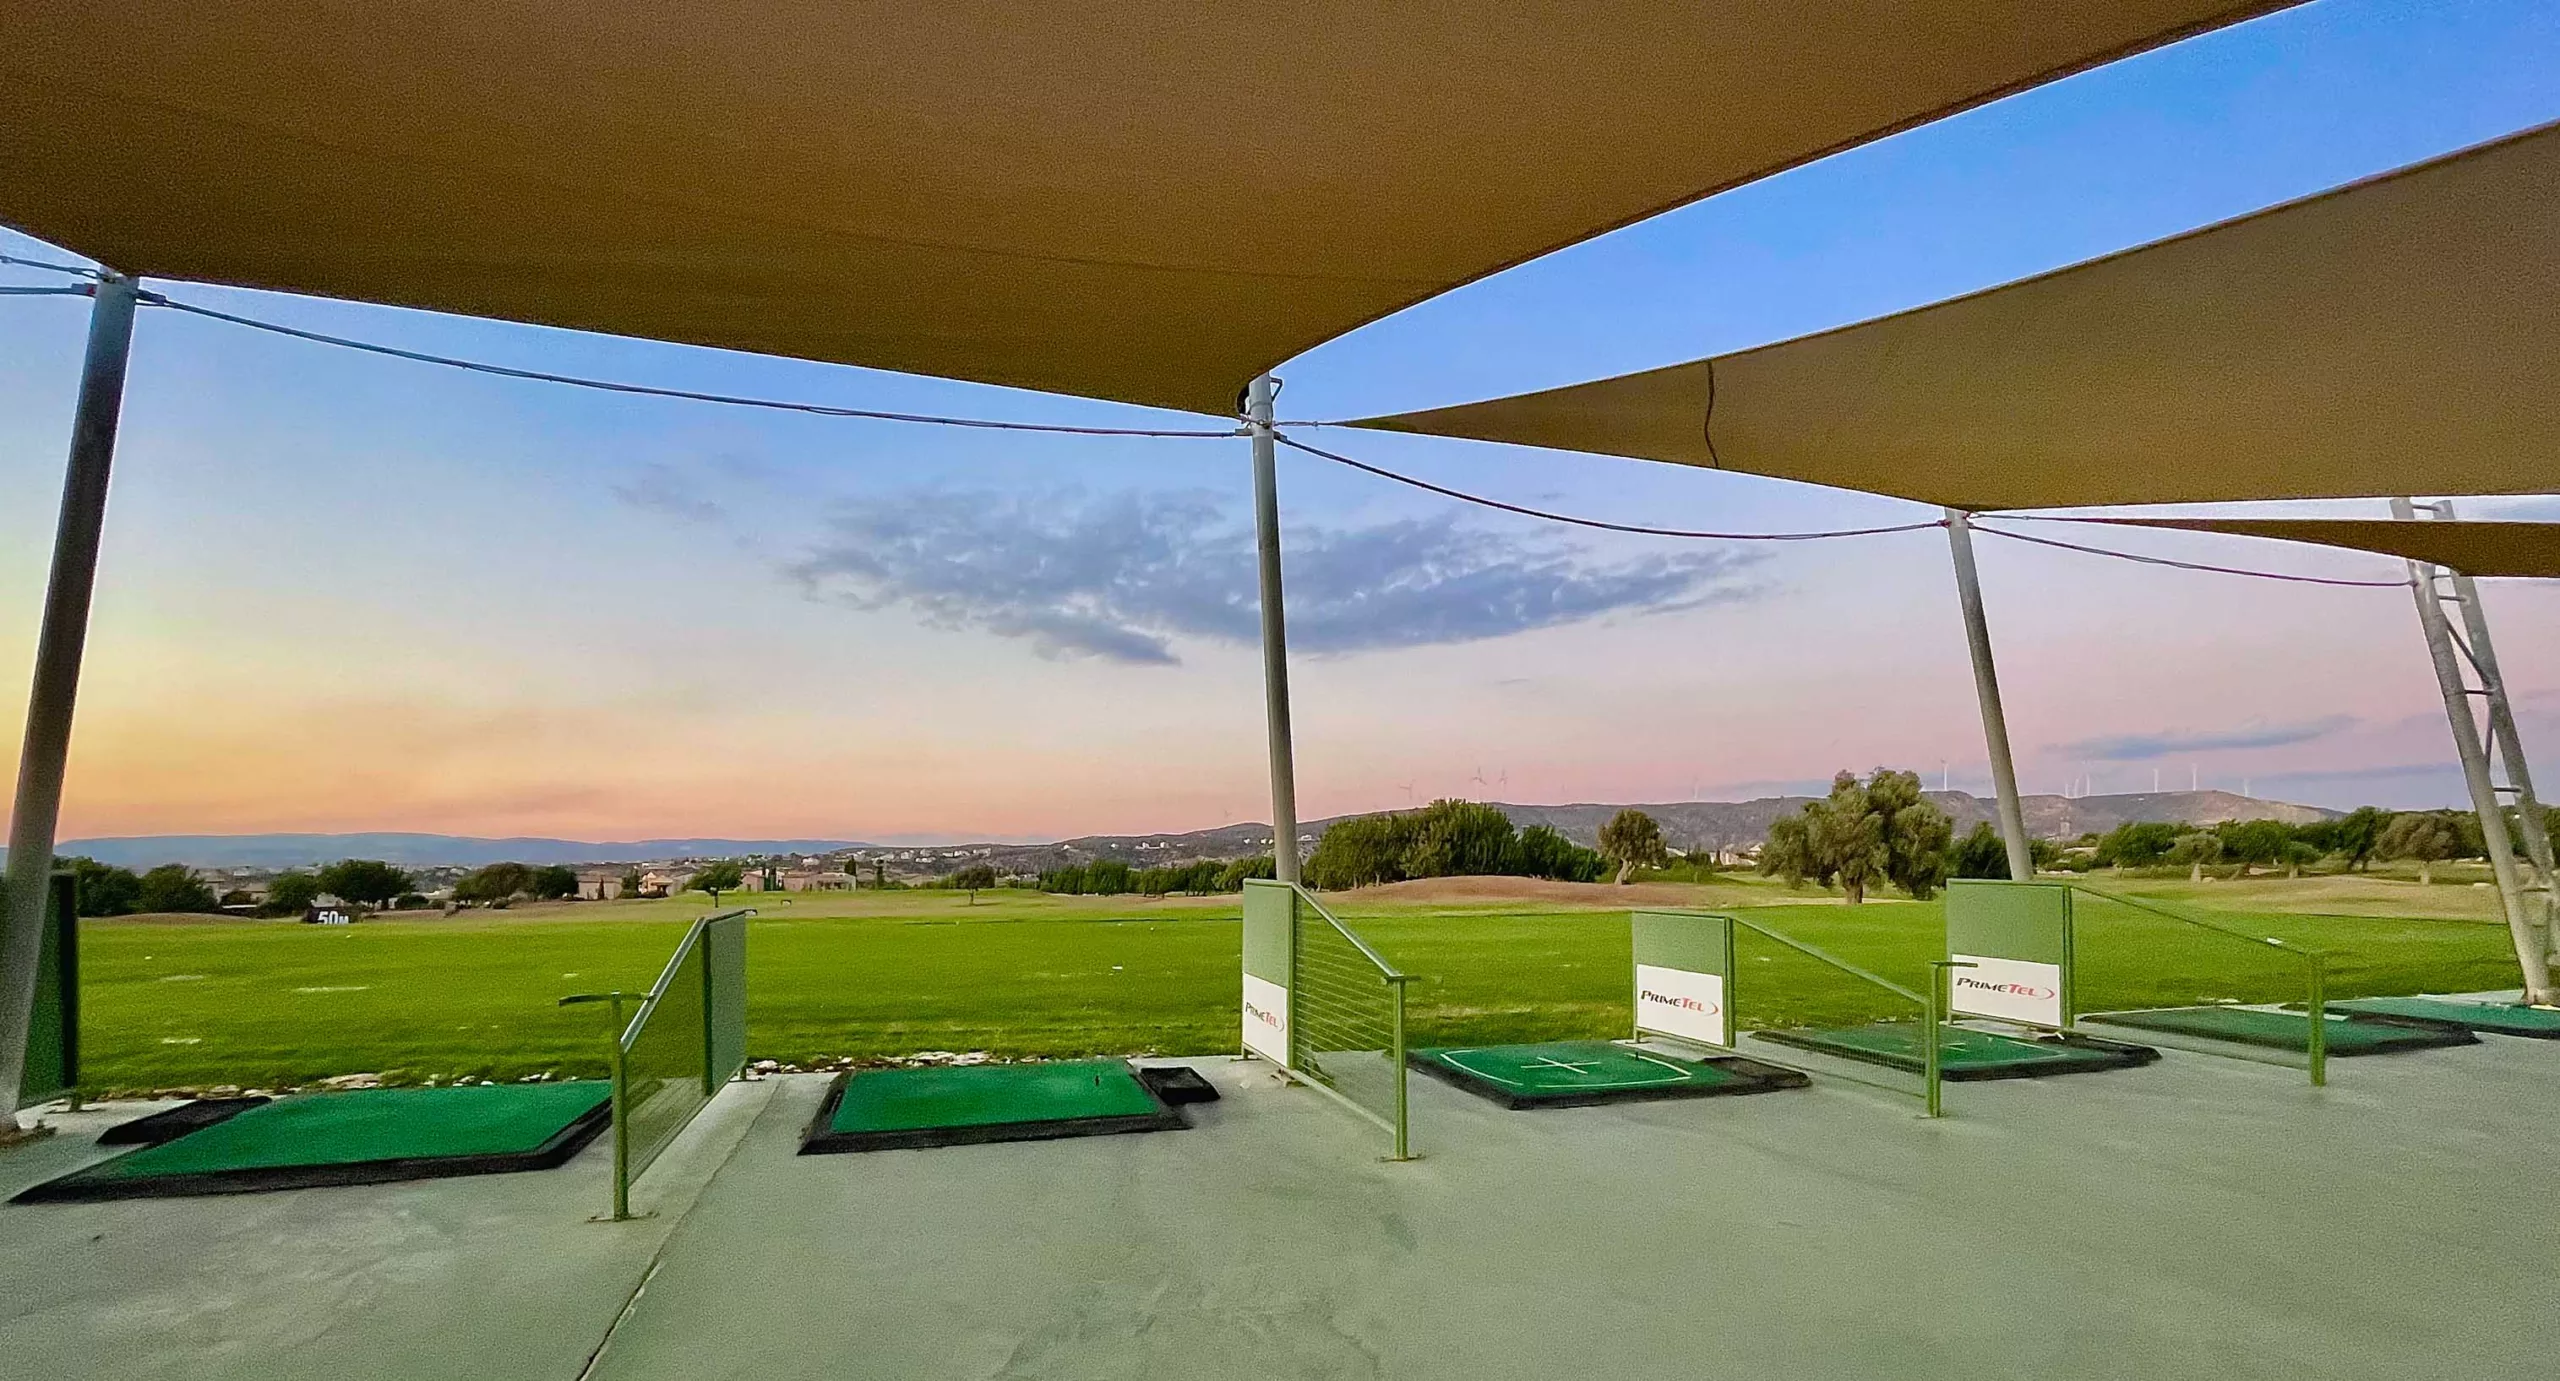 Driving range bays, with shade ports, looking over the driving range out to sunset at Aphrodite Hills PGA National Golf Course.